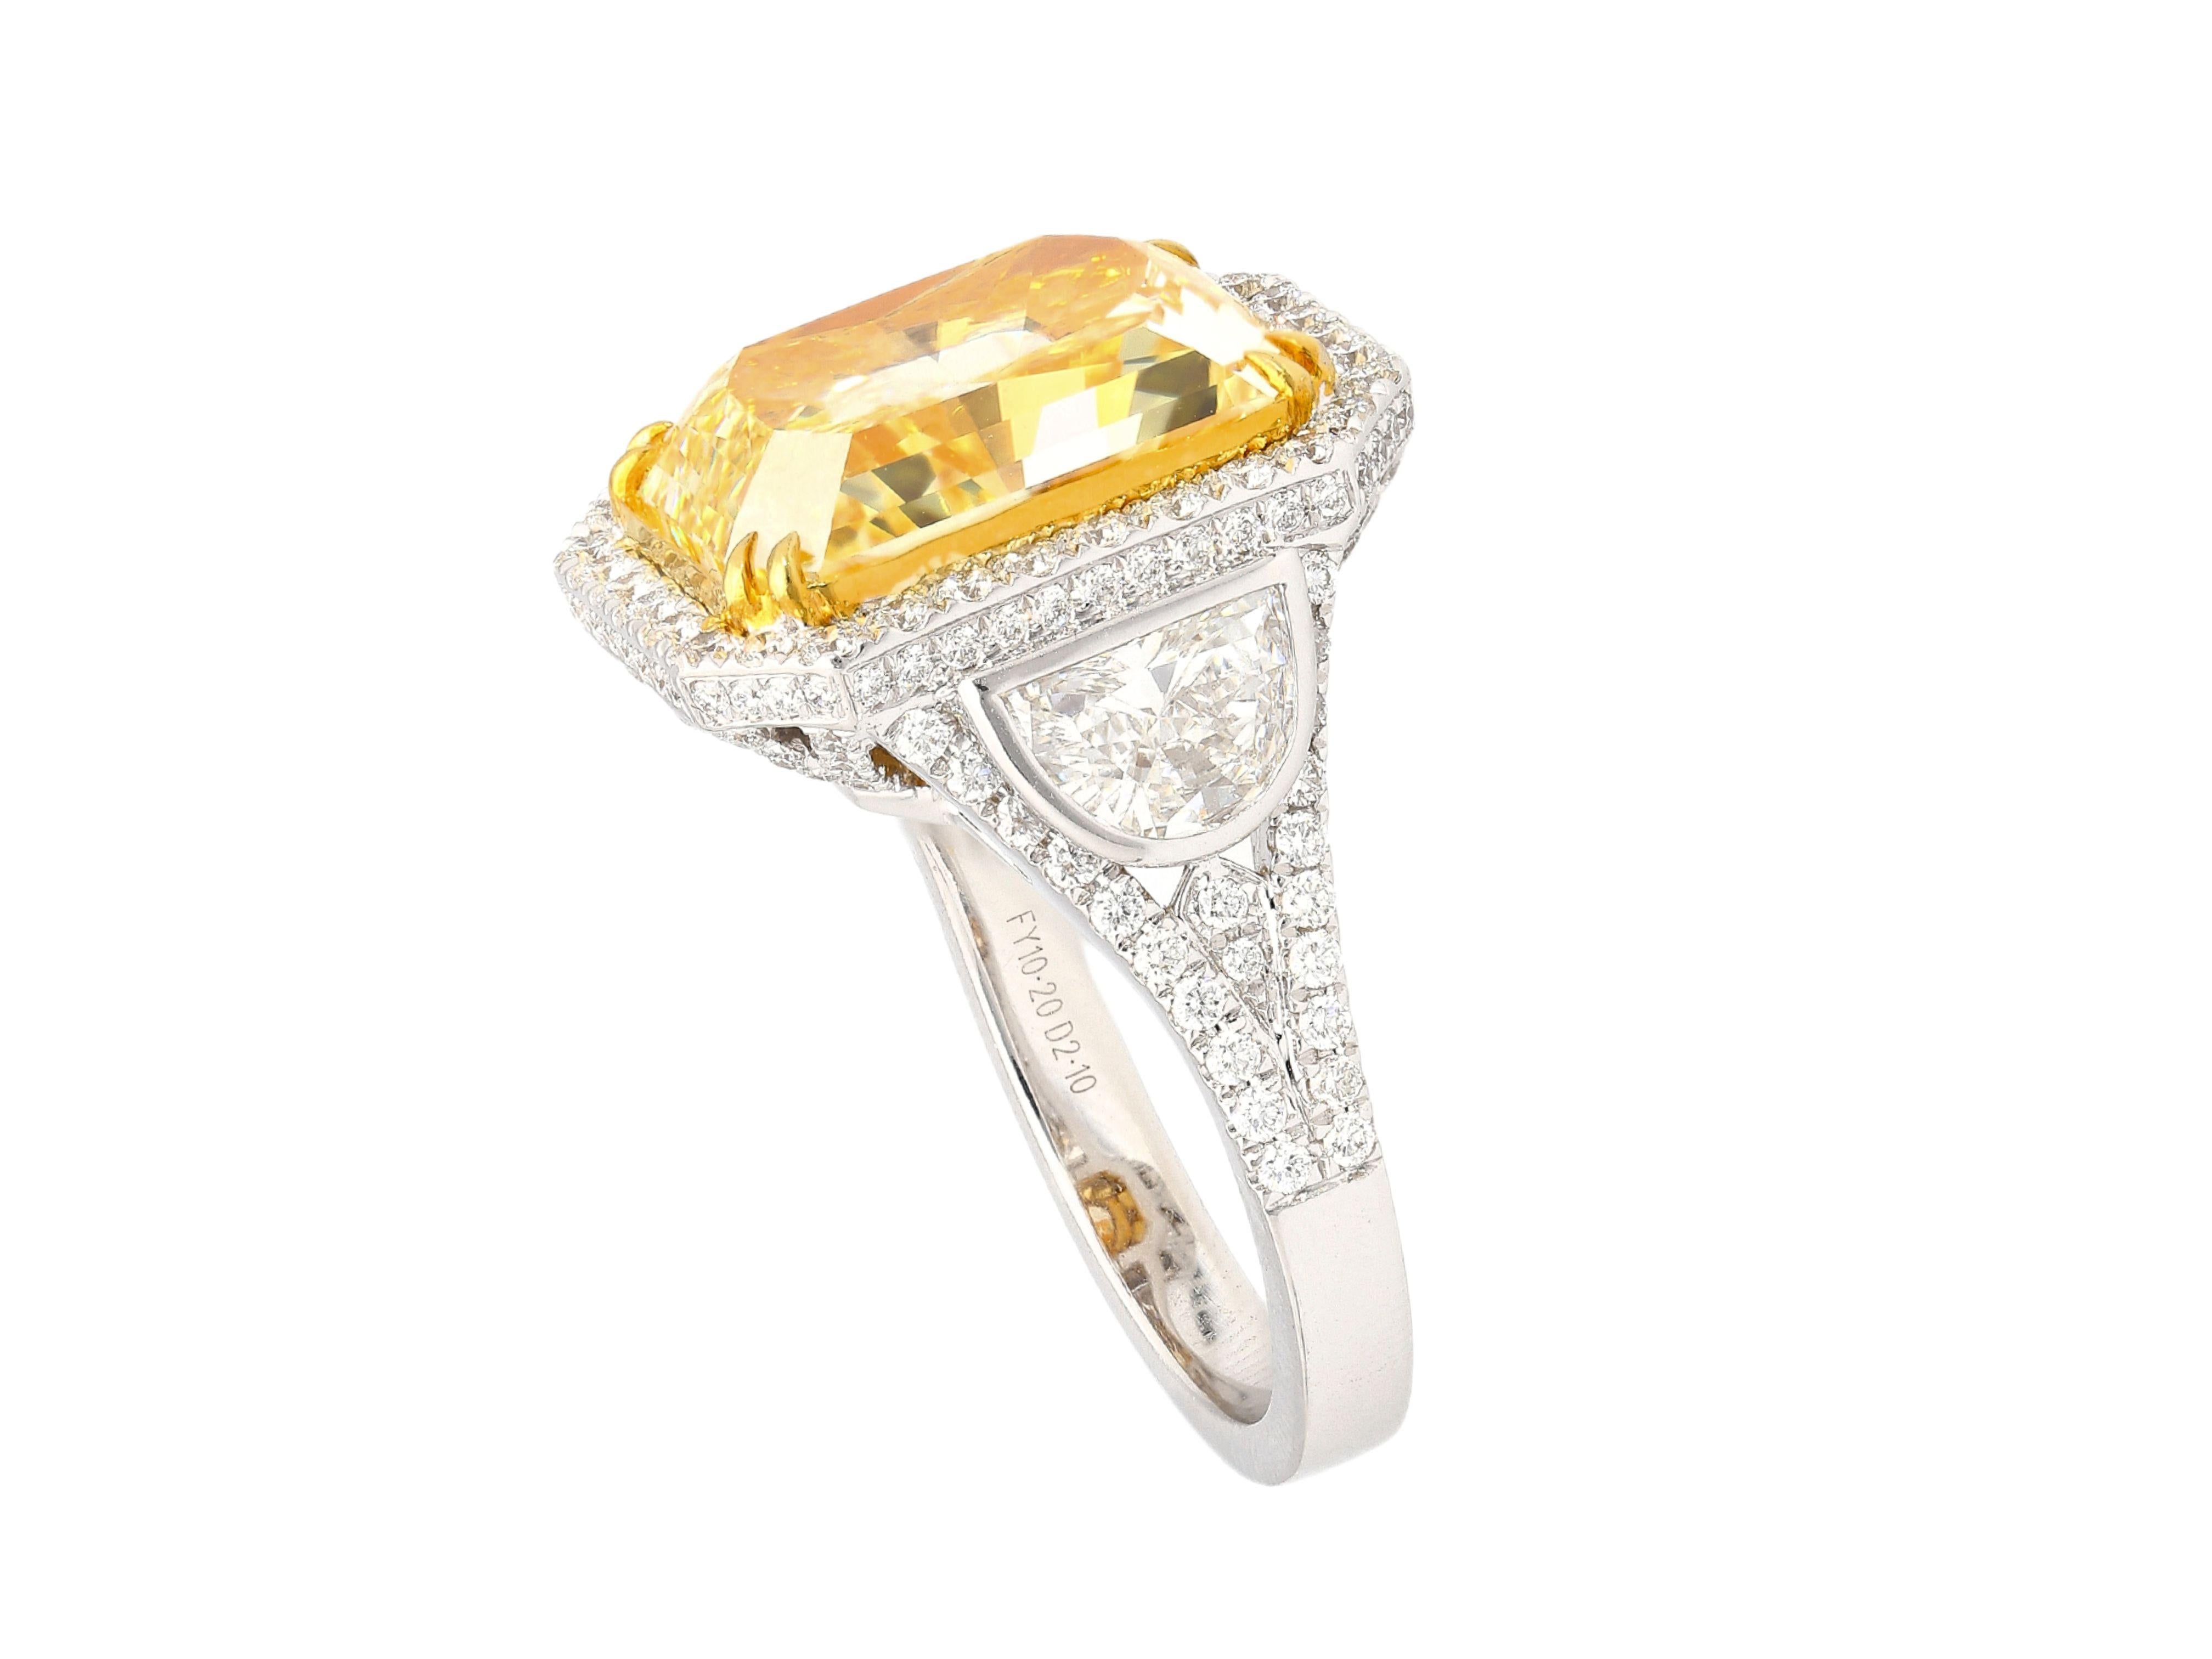 GIA certified 10.20 carat fancy intense yellow radiant cut diamond engagement ring. Set in 18k white and yellow gold. The ring features a dazzling round cut white diamond halo and encrusted ring shank, yellow gold prongs, and an open back on the